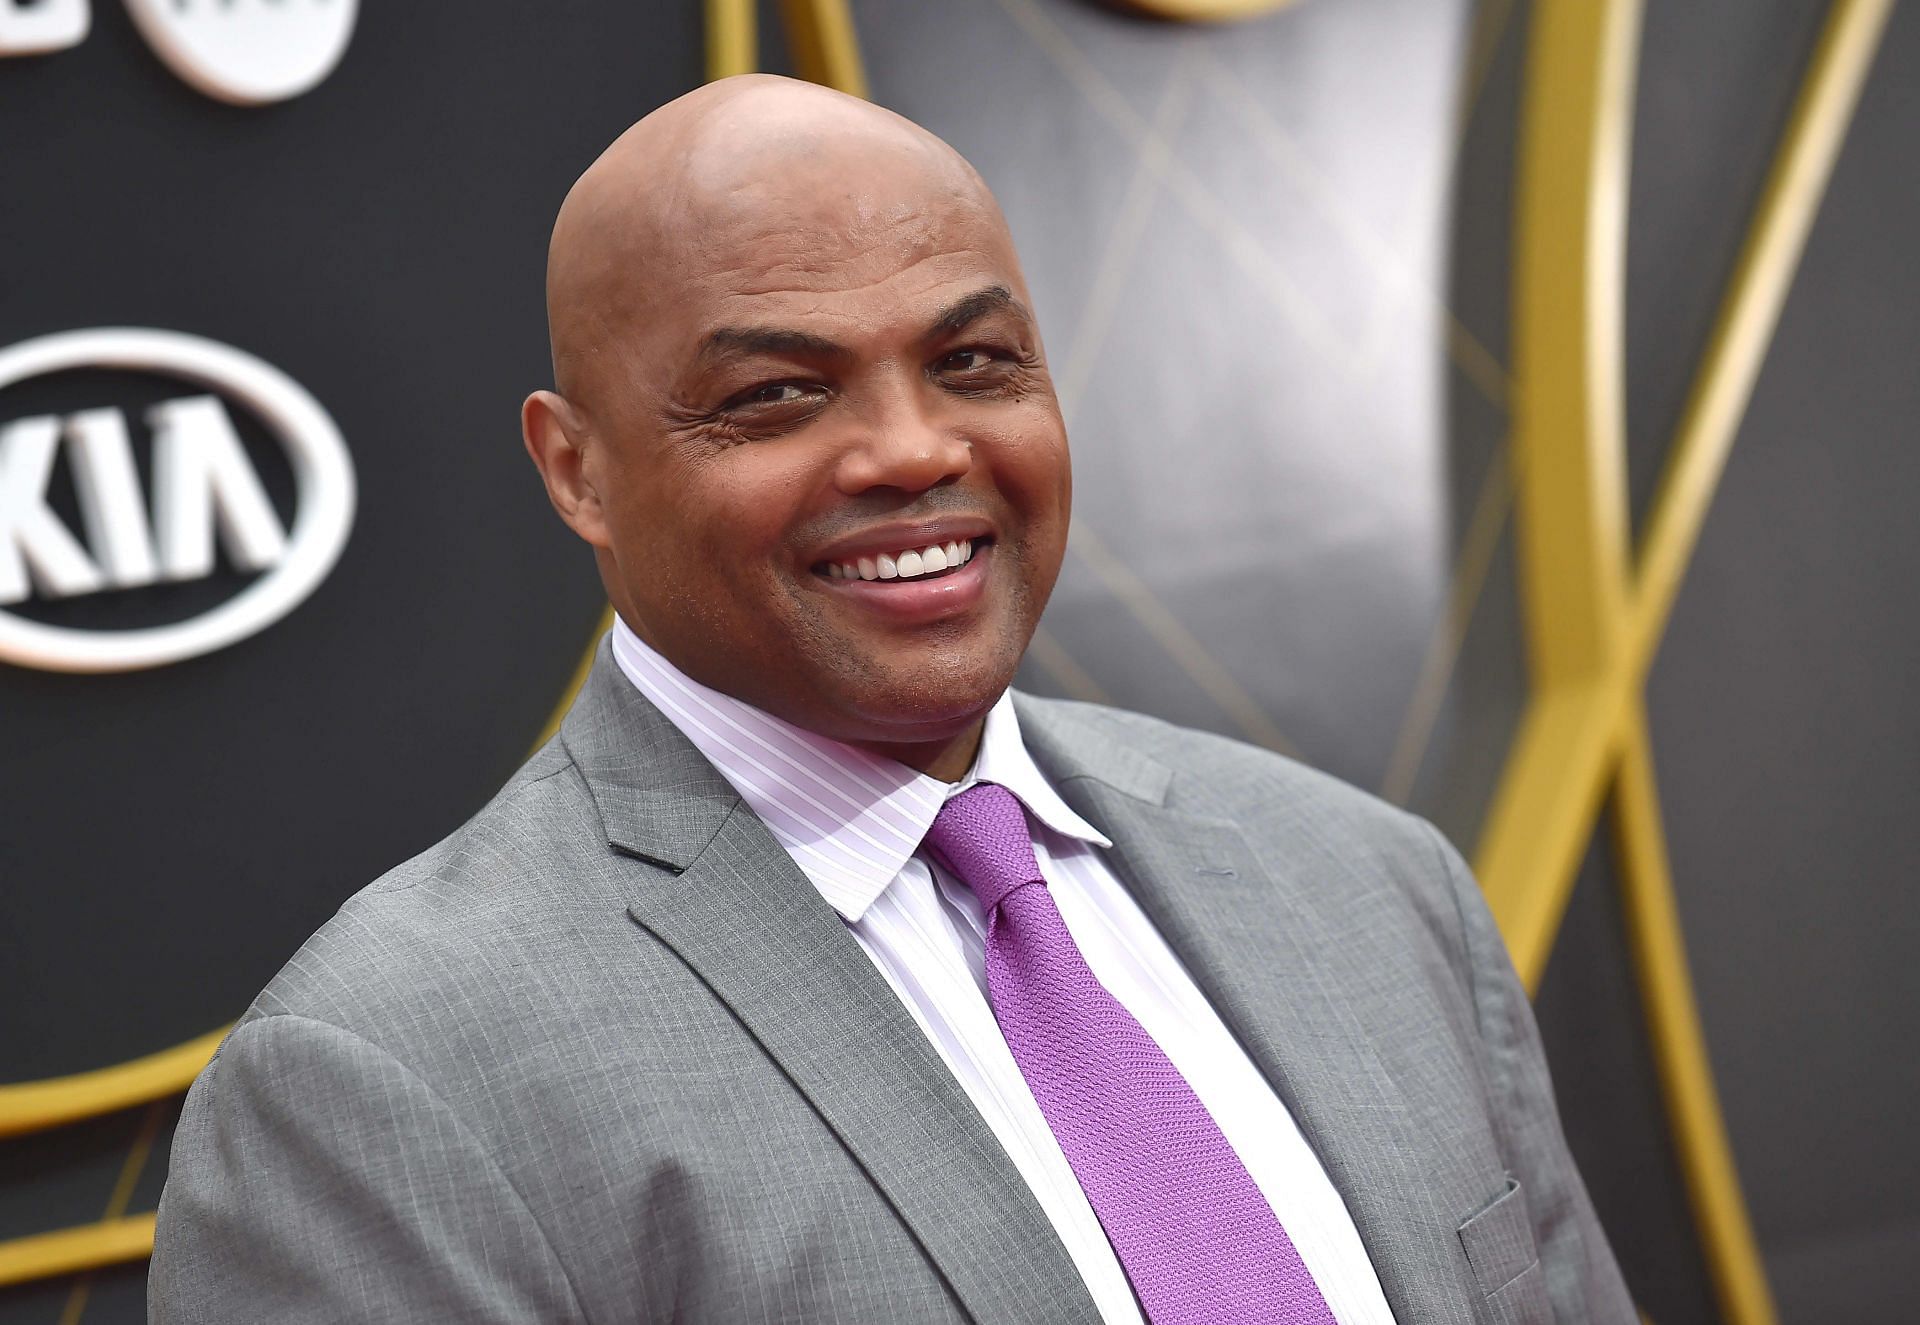 NBA legend and current analyst Charles Barkley